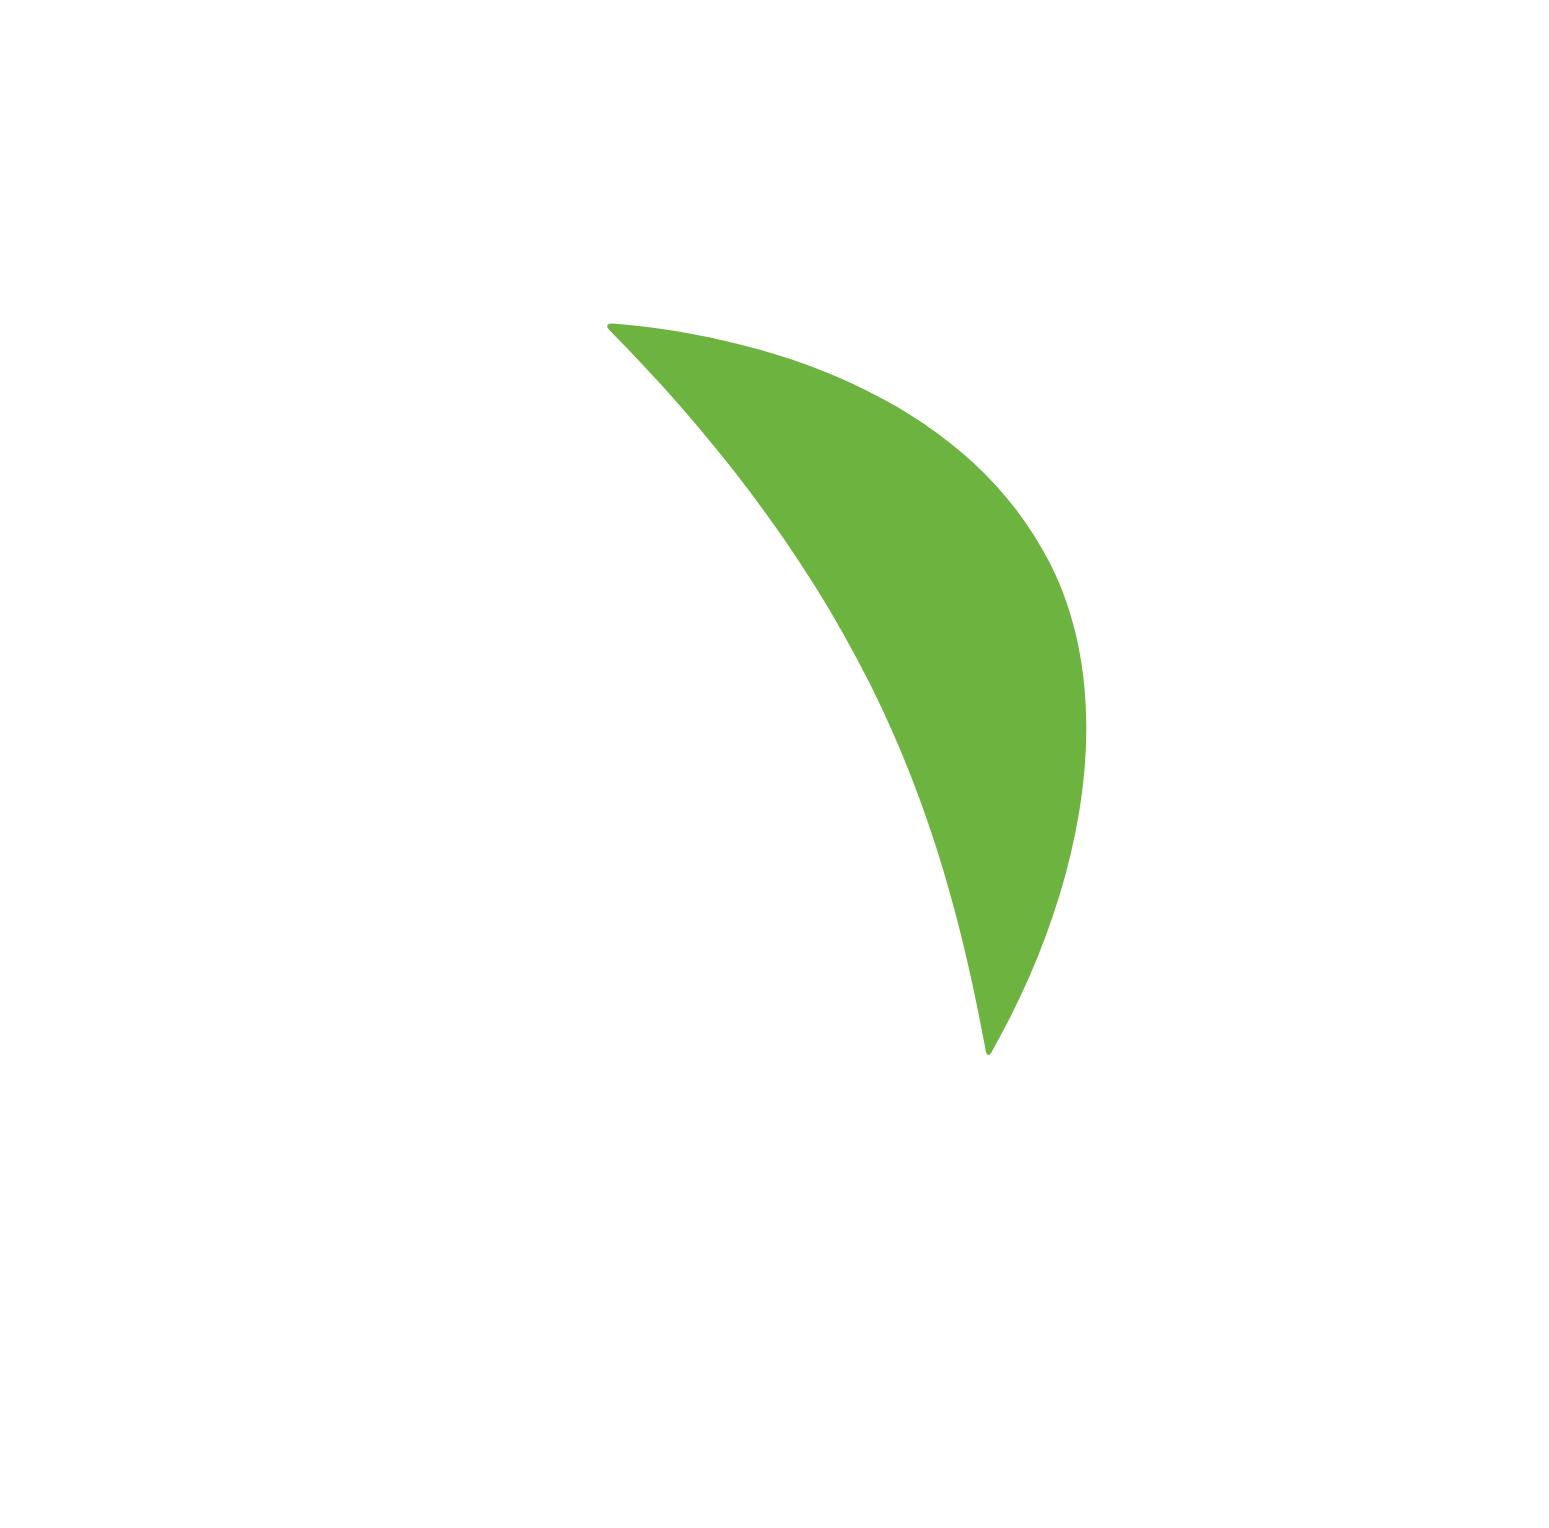 Sysco logo for dark backgrounds (transparent PNG)